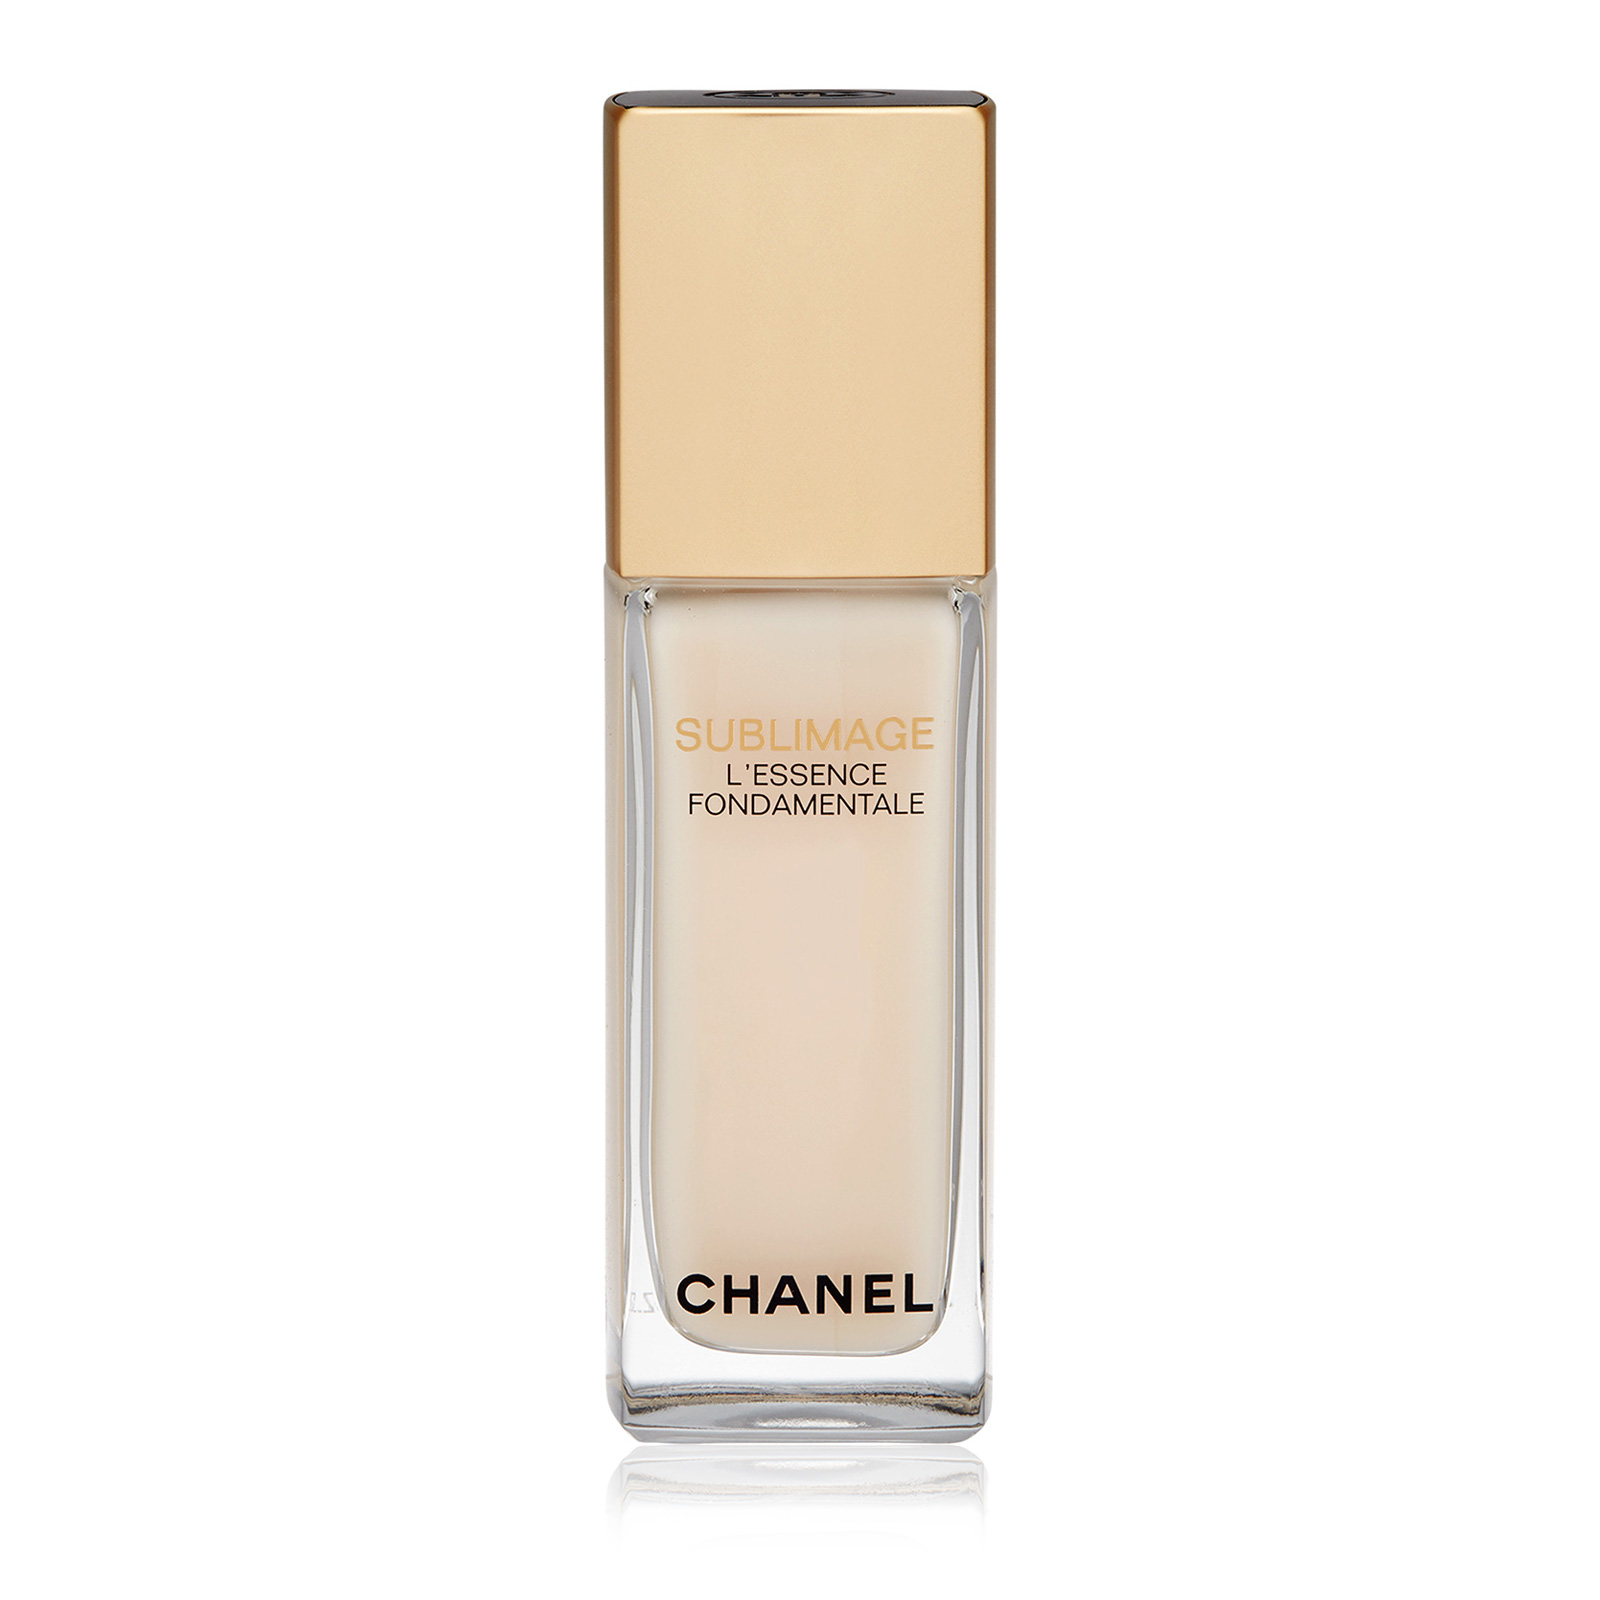 Why The Chanel Sublimage L'Essence Fondamentale Is Worth Its Weight In Gold